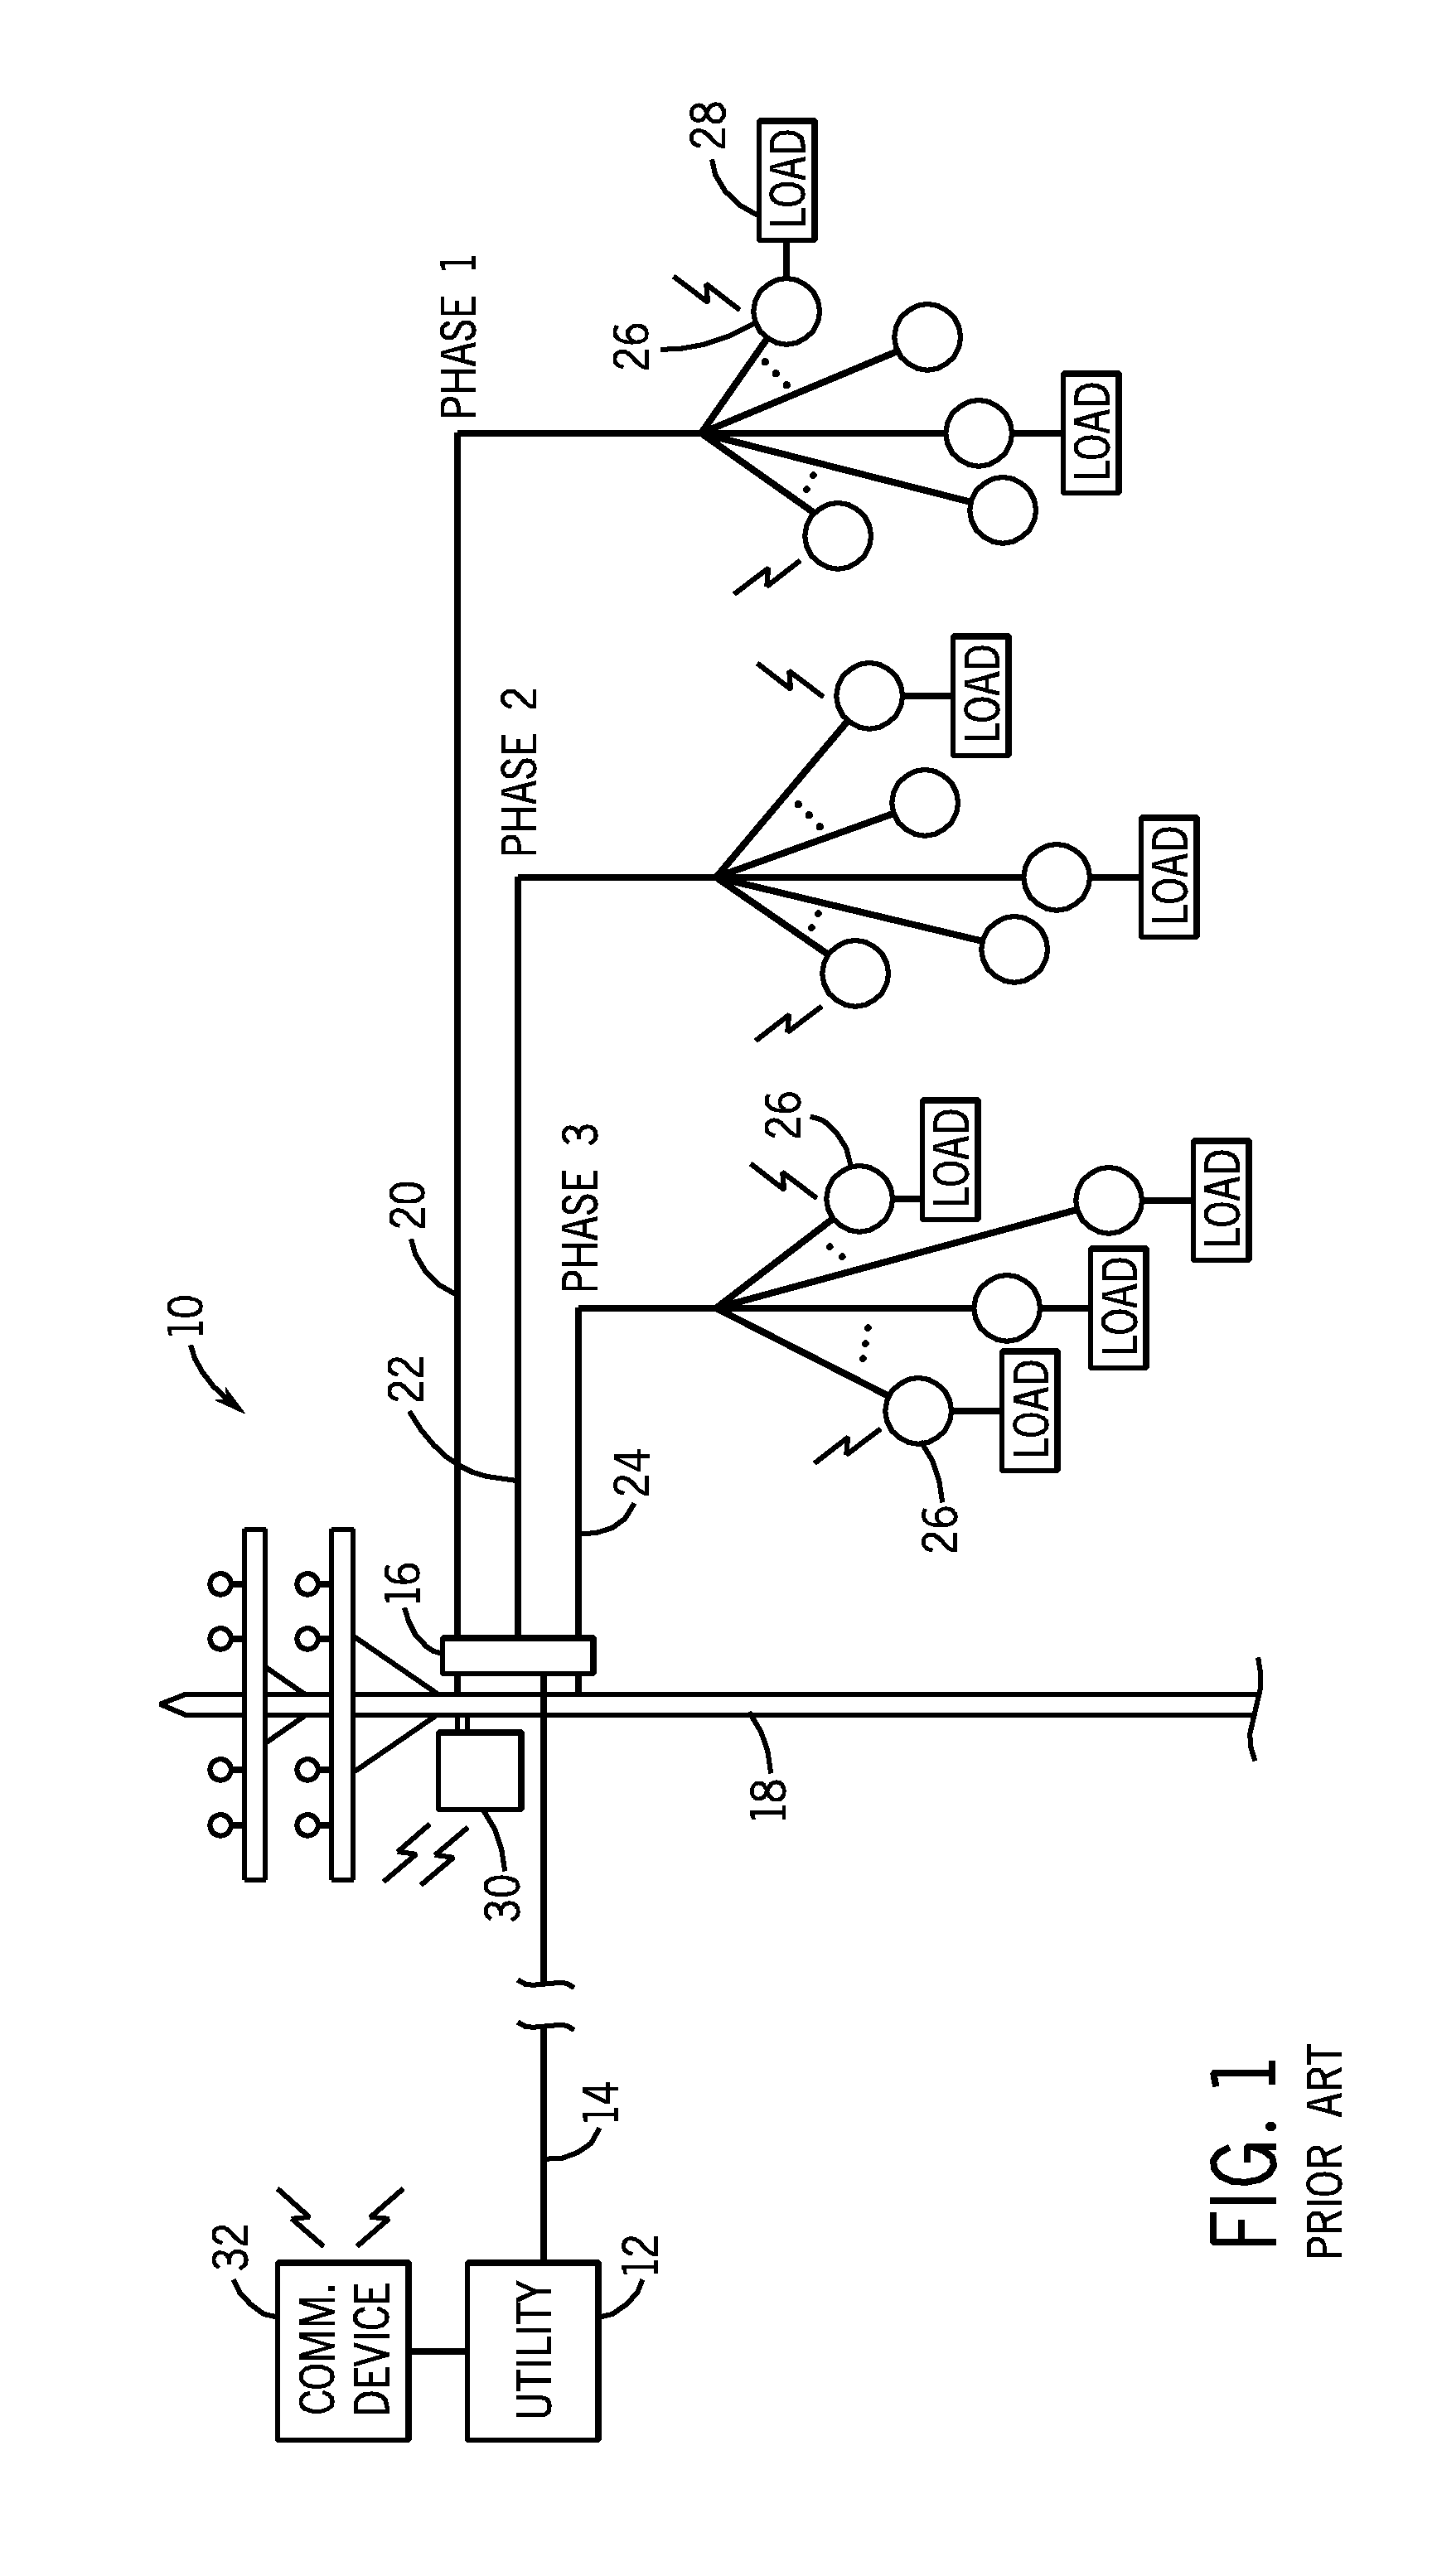 System and method for phase load discovery